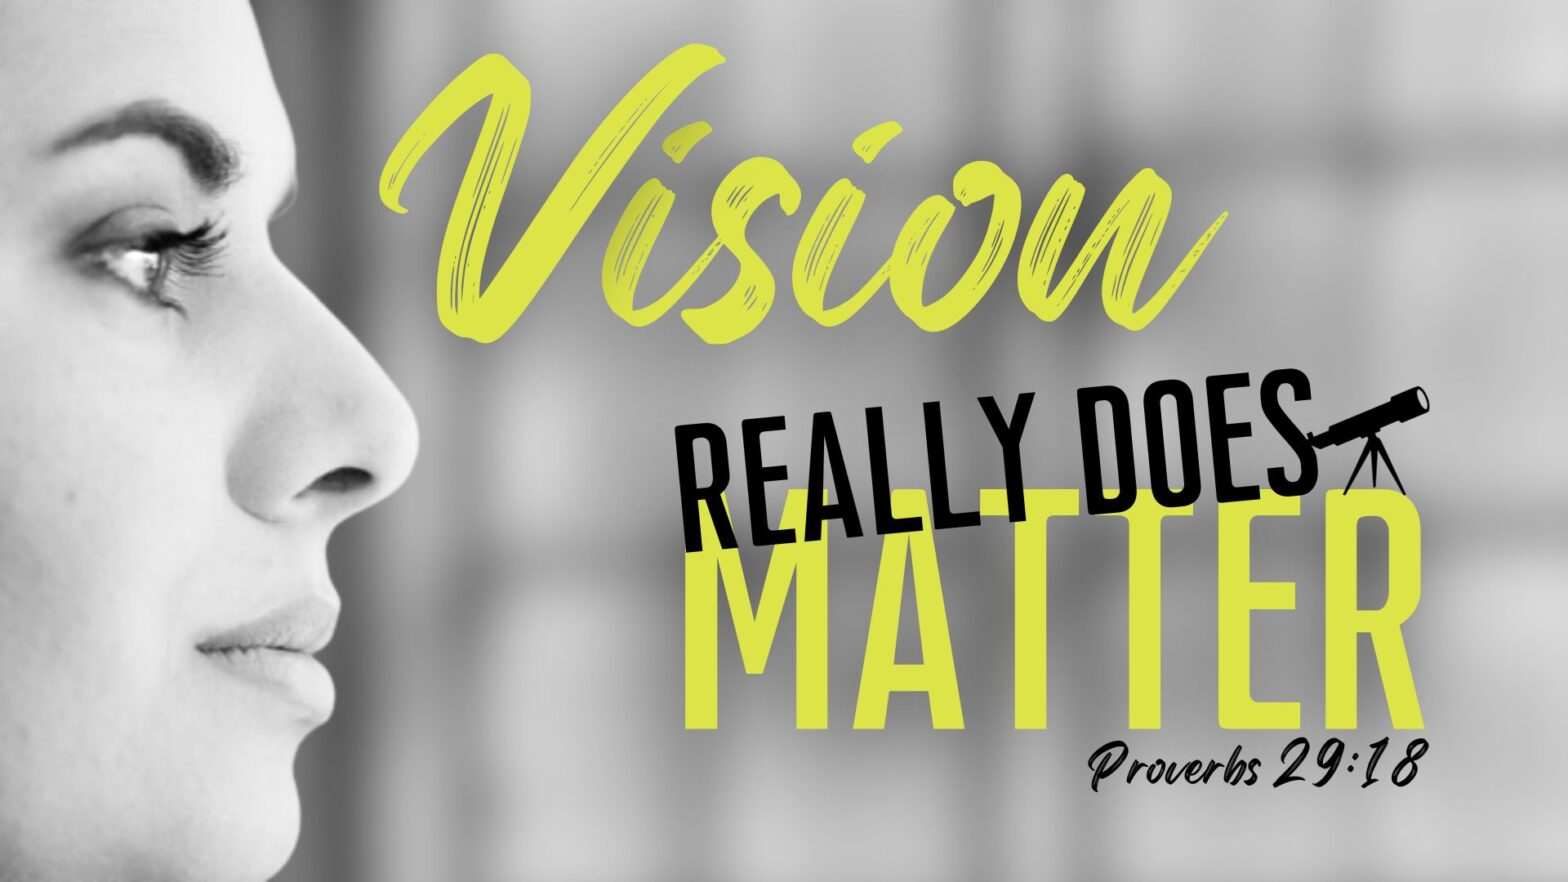 Vision Really Does Matter